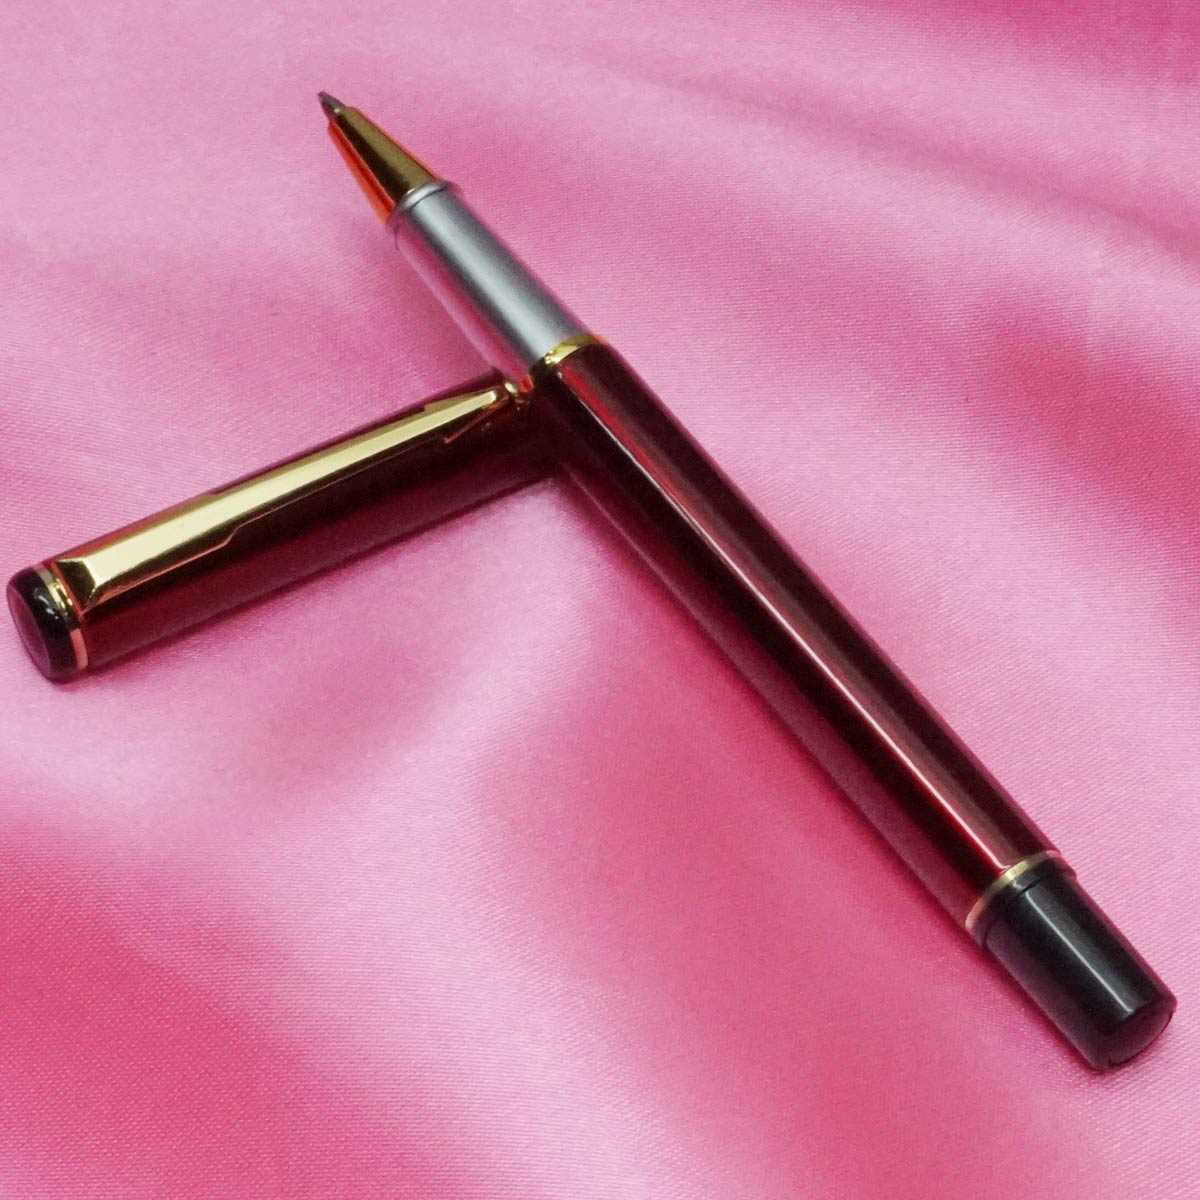 penhouse.in Glossy Finish Marrown Color Body With Gold Trim Medium Tip Roller Ball Pen SKU 21478